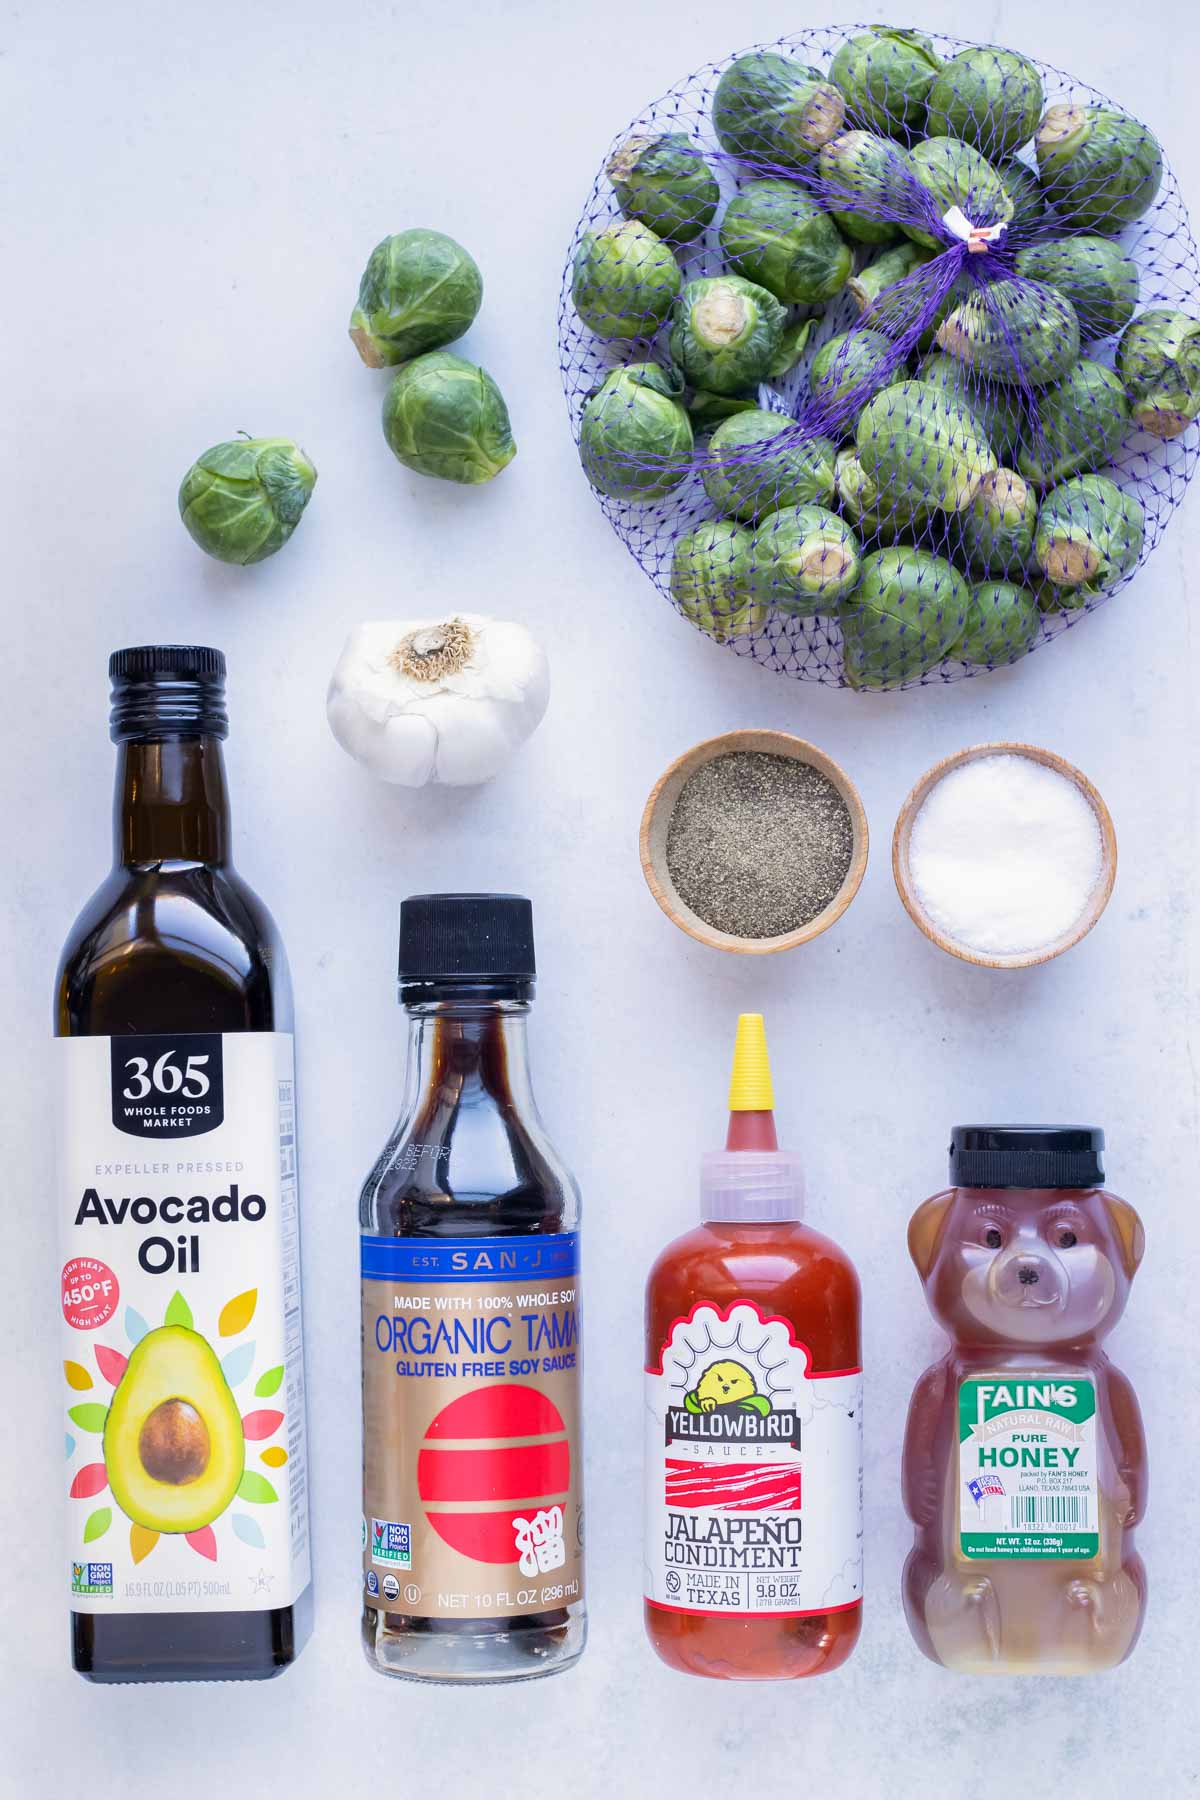 Avocado oil, Brussels sprouts, and salt are needed to cook, honey, sriracha, soy sauce and garlic are the ingredients for the sauce.